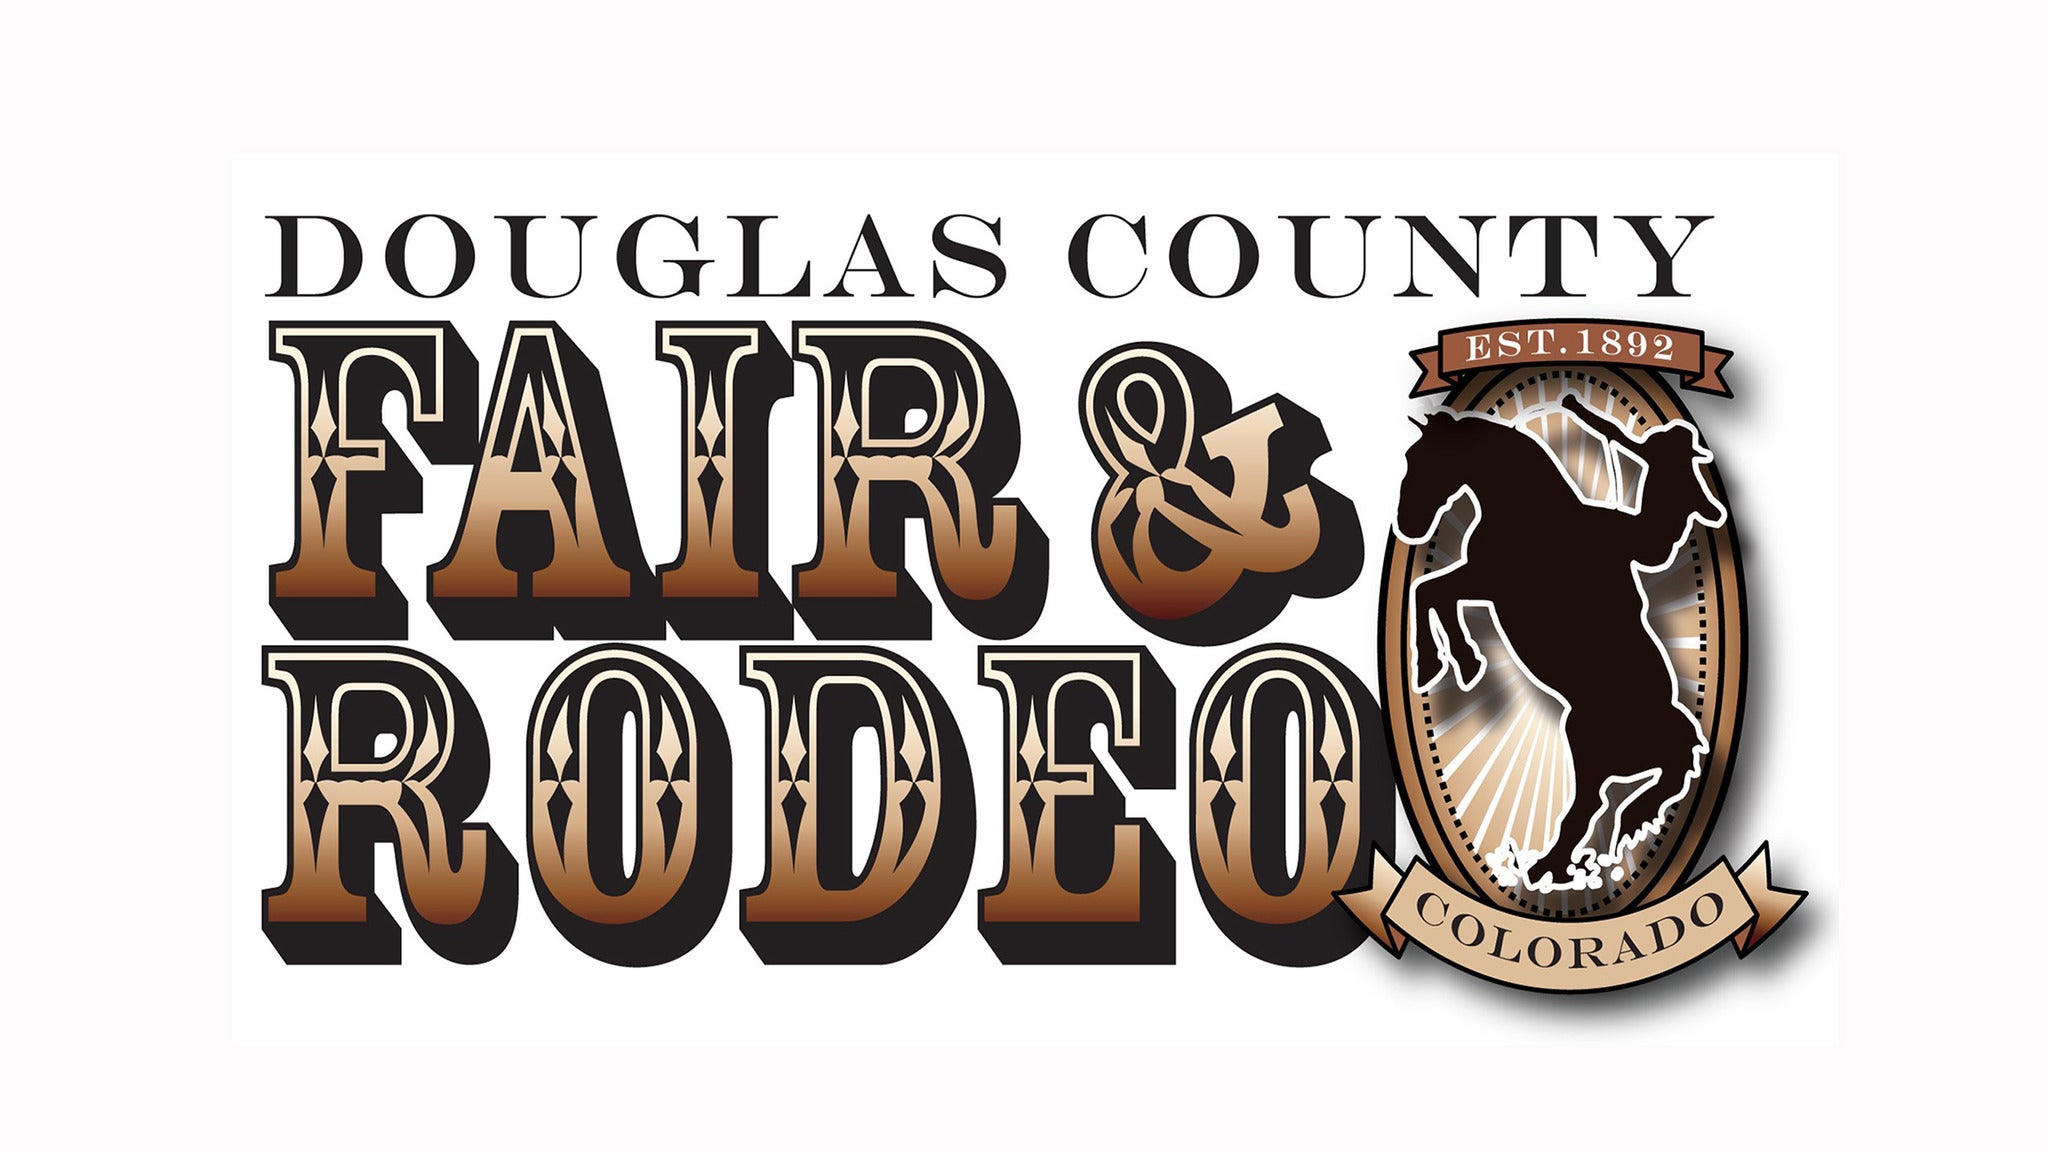 Douglas County Fair & Rodeo Grounds Admissions in Castle Rock promo photo for Last Chance 10% Discount presale offer code